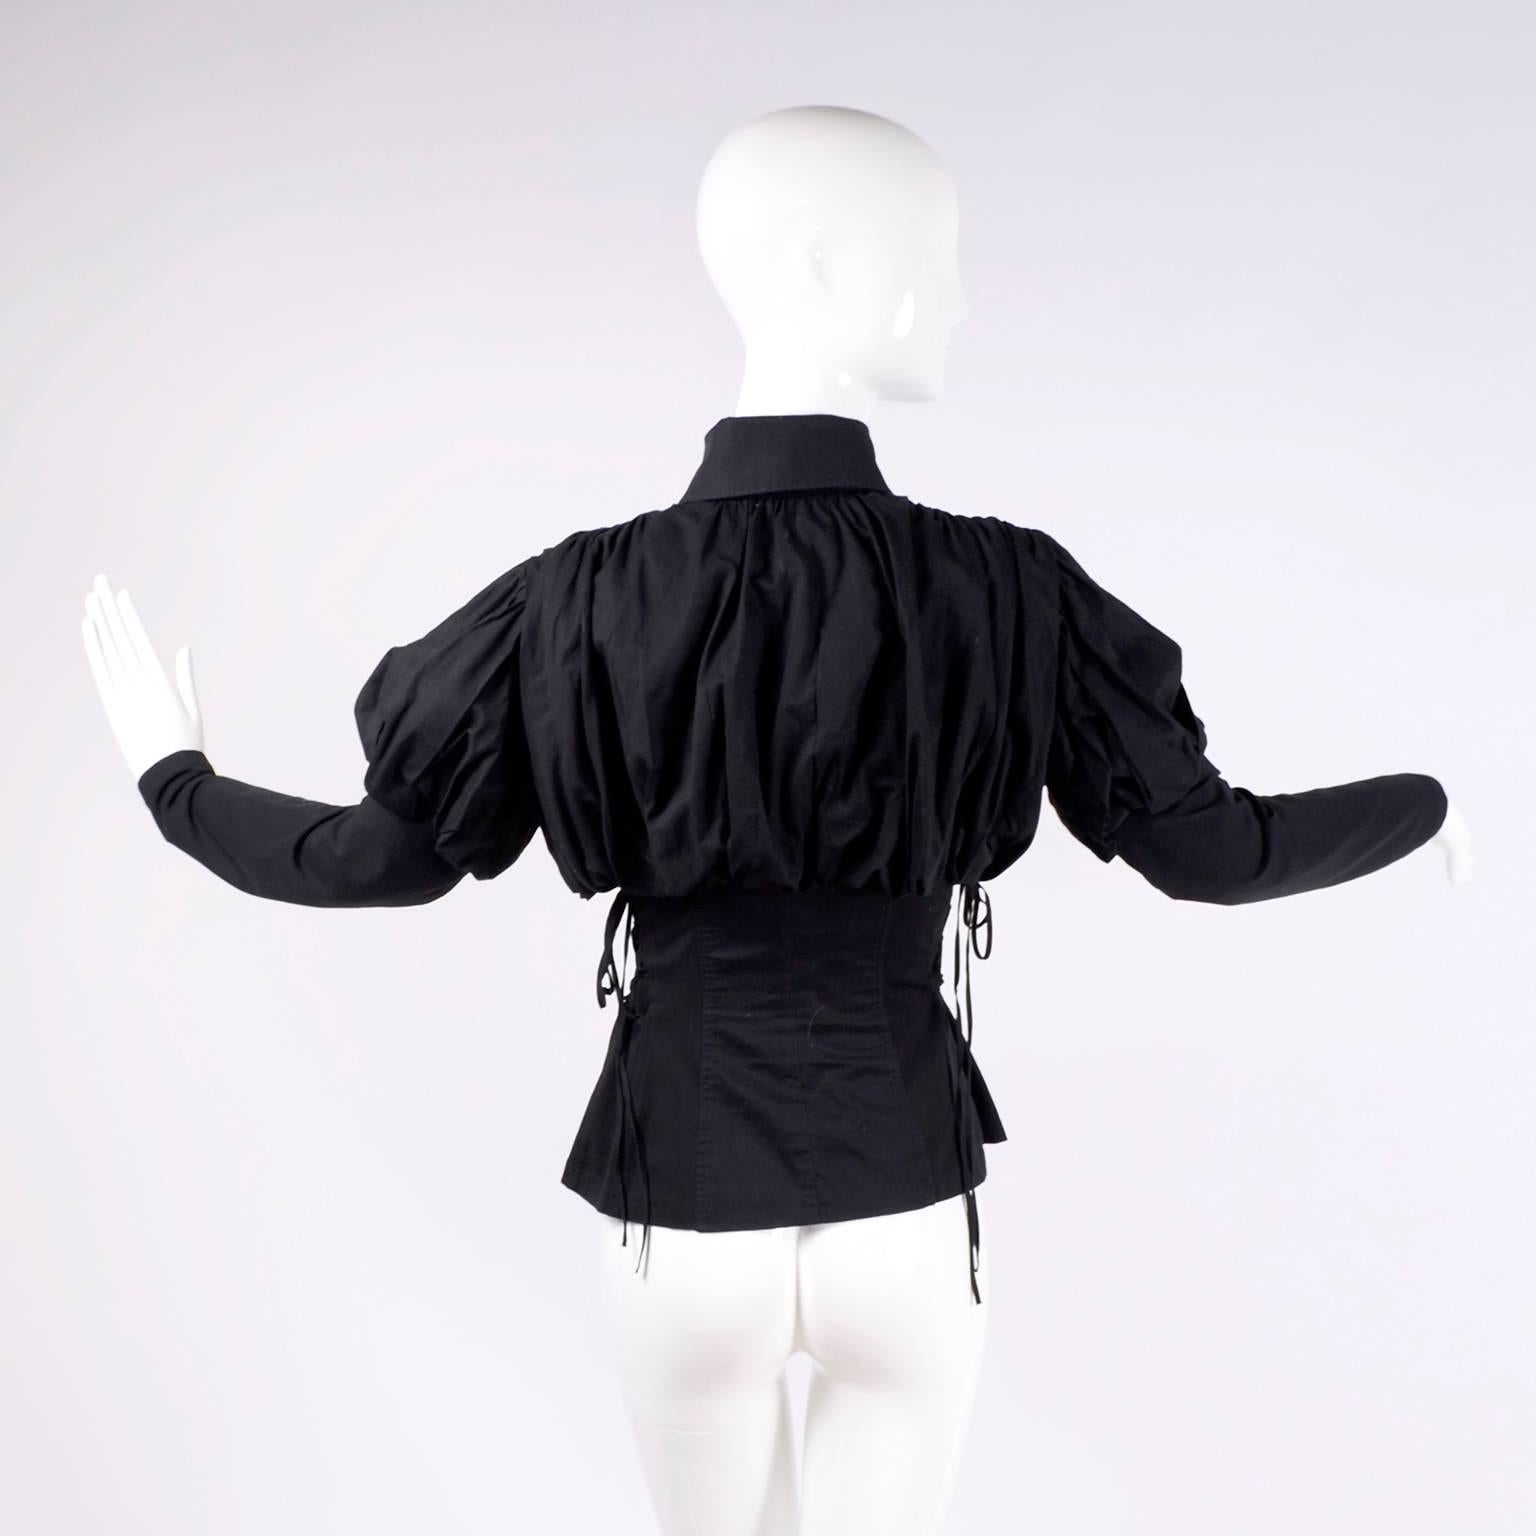 Anne Fontaine Blouse in Black Cotton Gothic Victorian Style w/ Laces up Sides 40 2